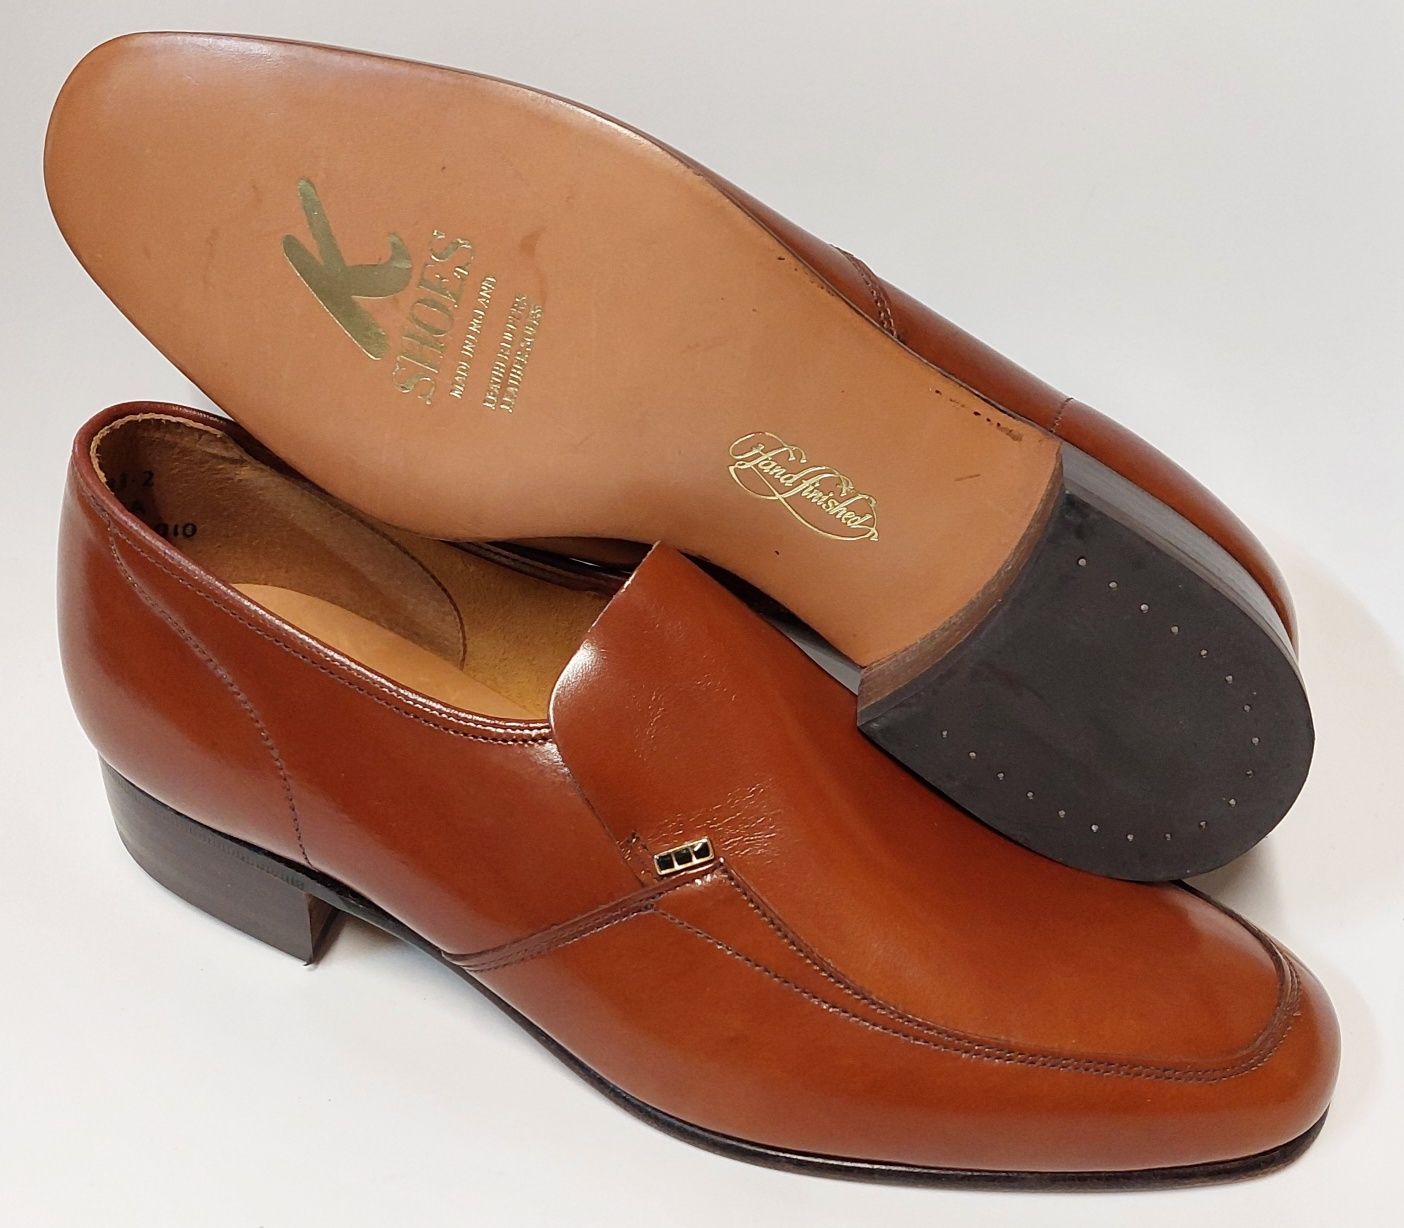 Buty K Shoes Loafers roz.40 Made in England  skóra naturalna